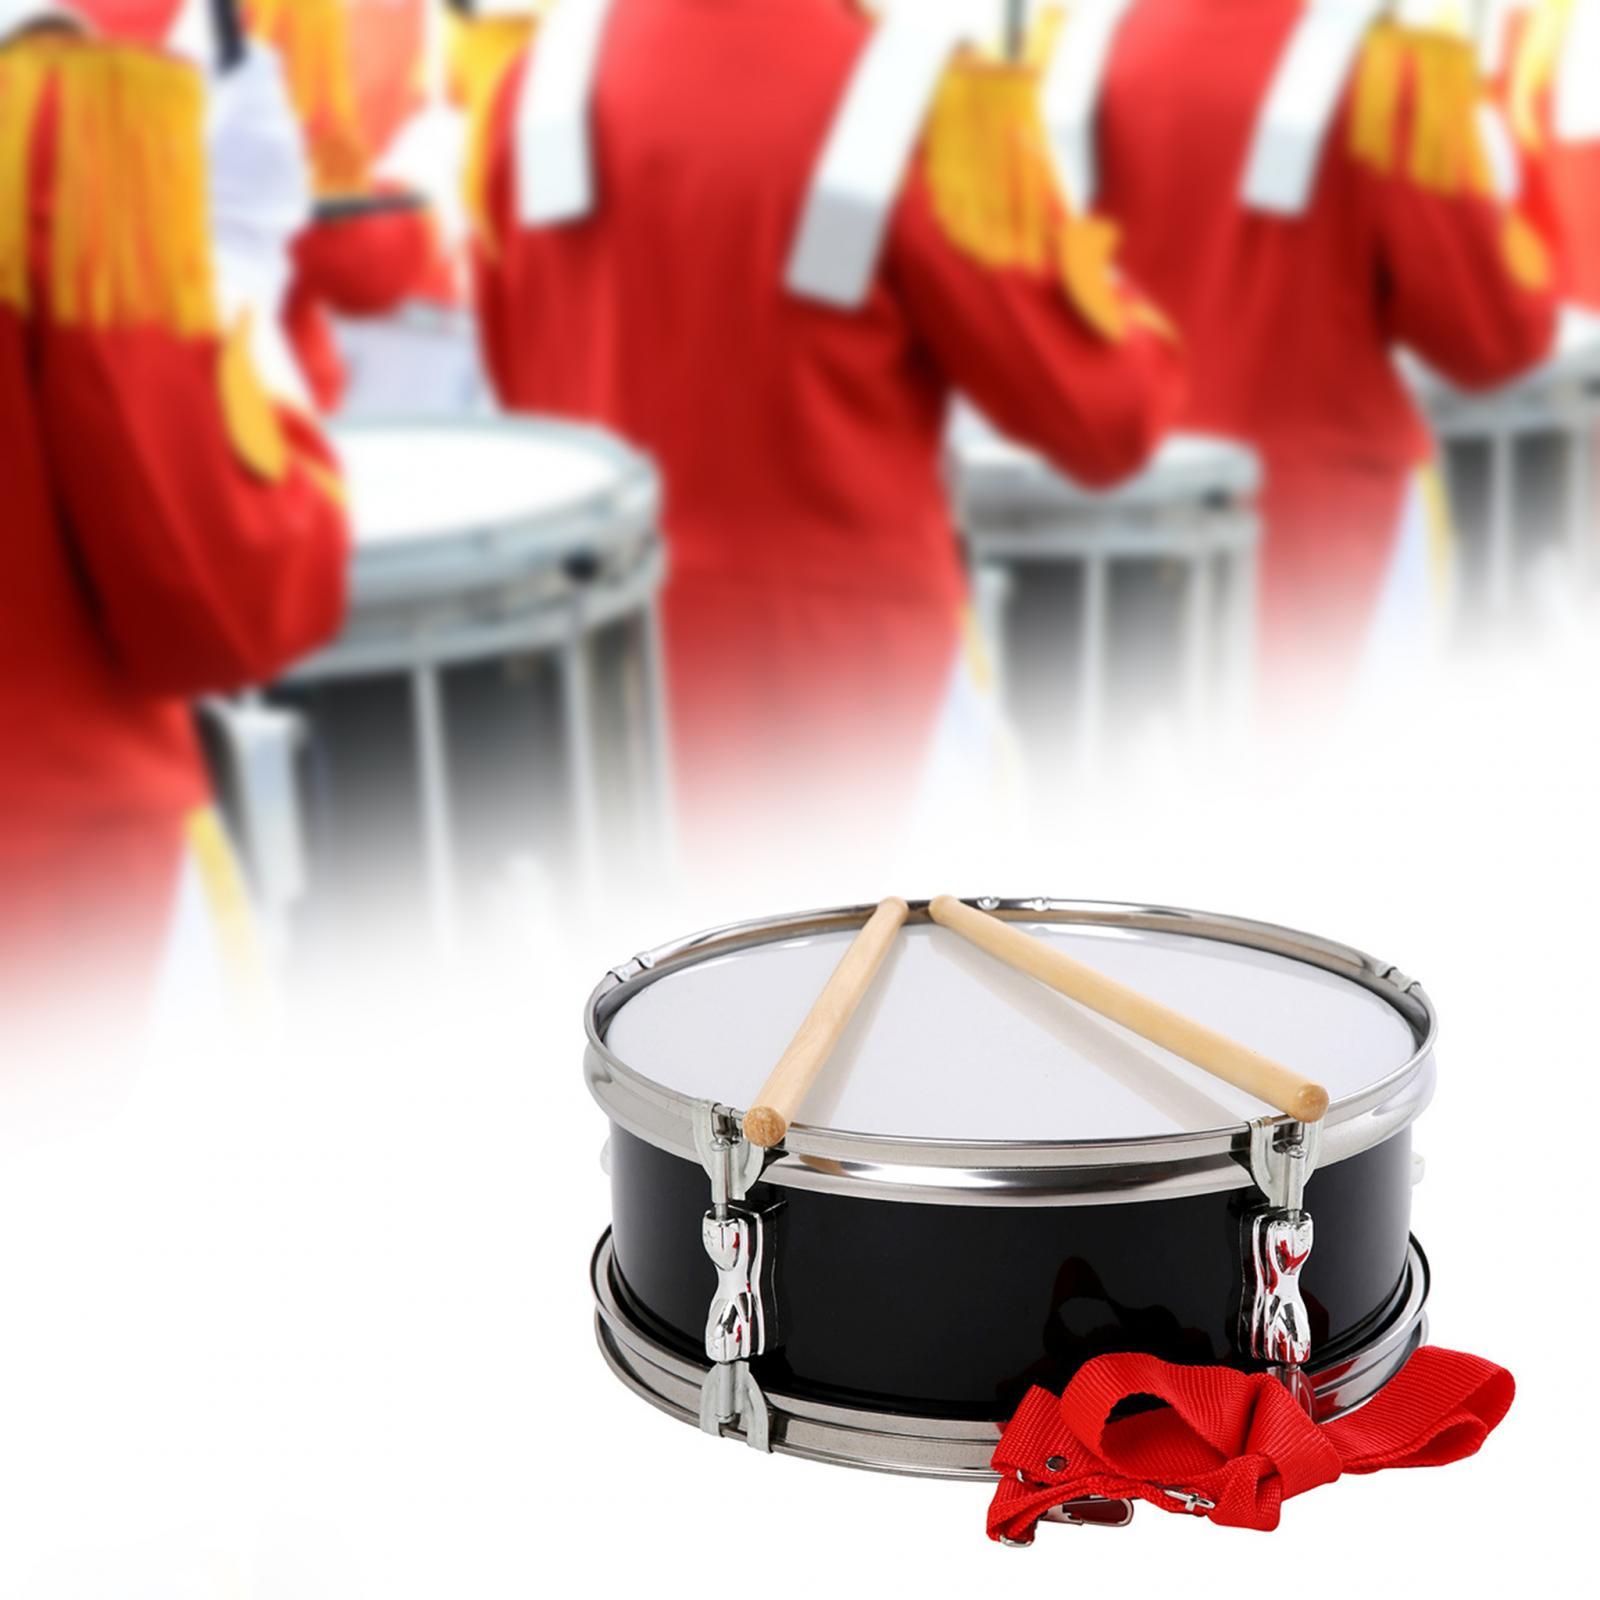 Baoblaze 13 Snare Drum Educational Toy Music Drums for Kids Children Boys